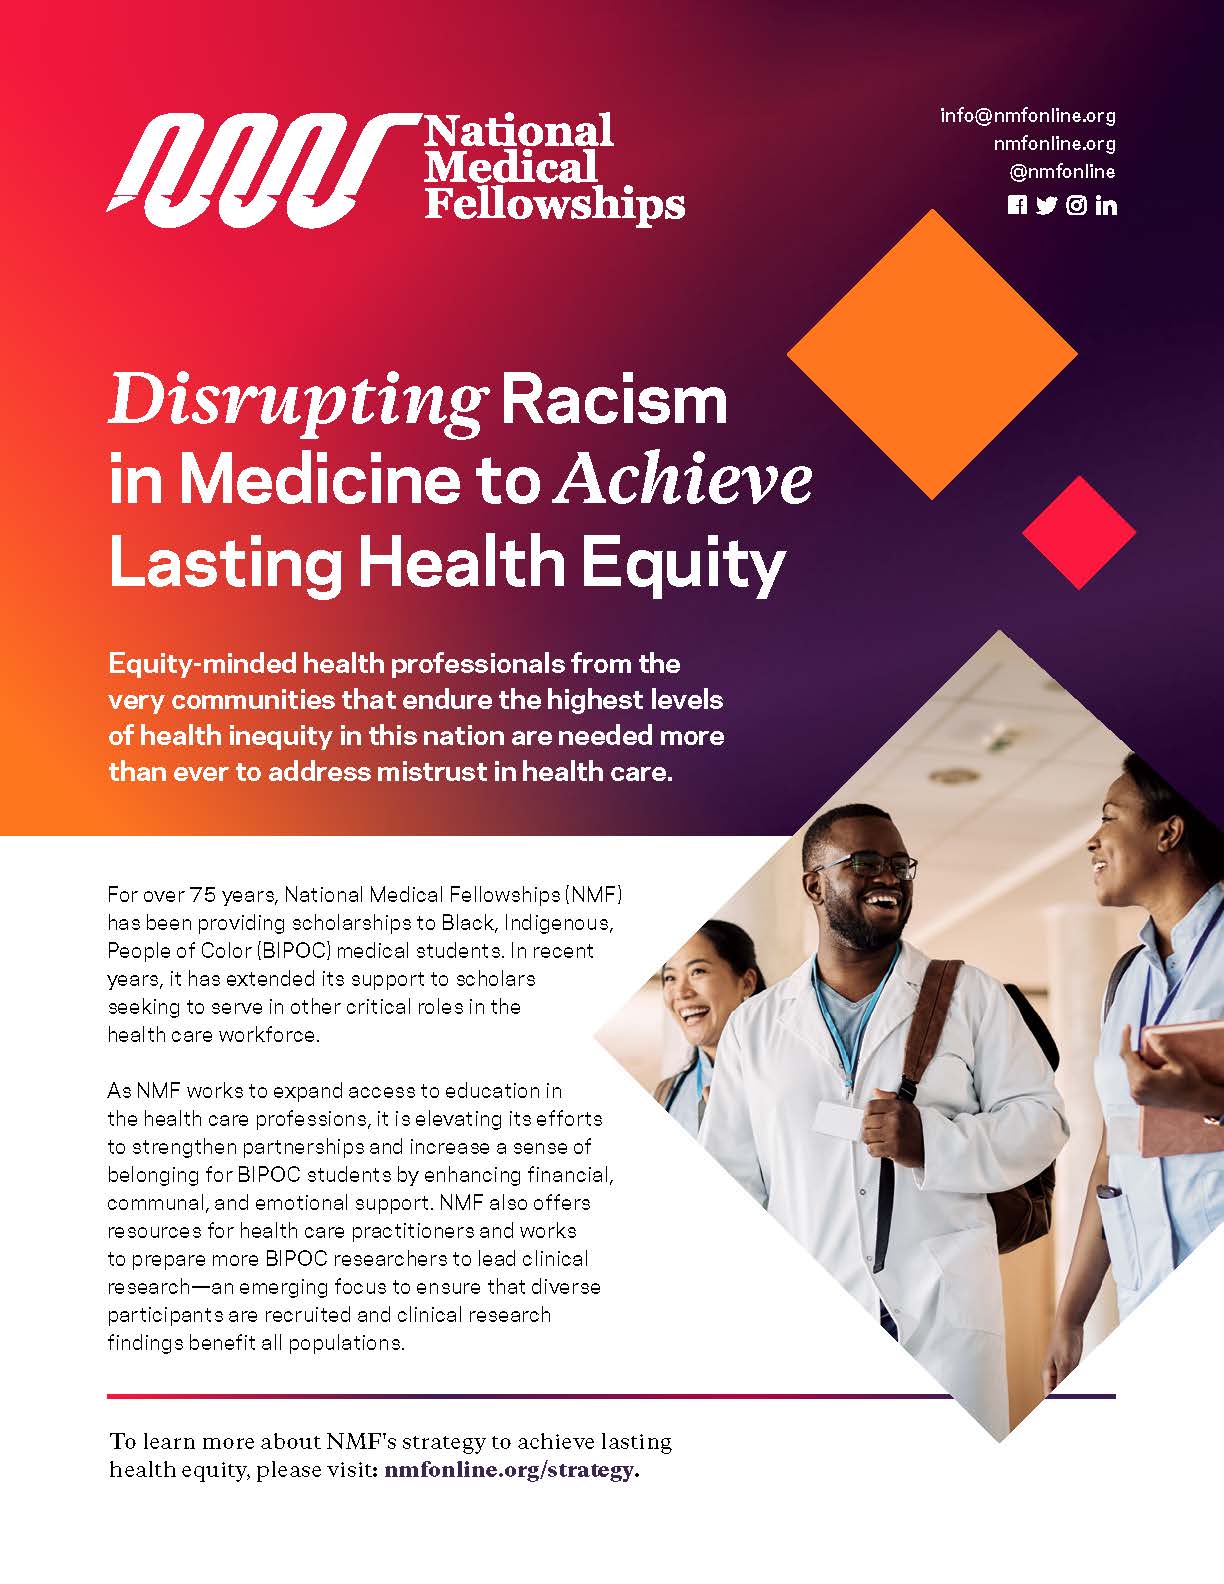 Image of a publication with the title "Disrupting Racism in Medicine to Achieve Lasting Health Equity" Includes a photo of doctors walking and talking.